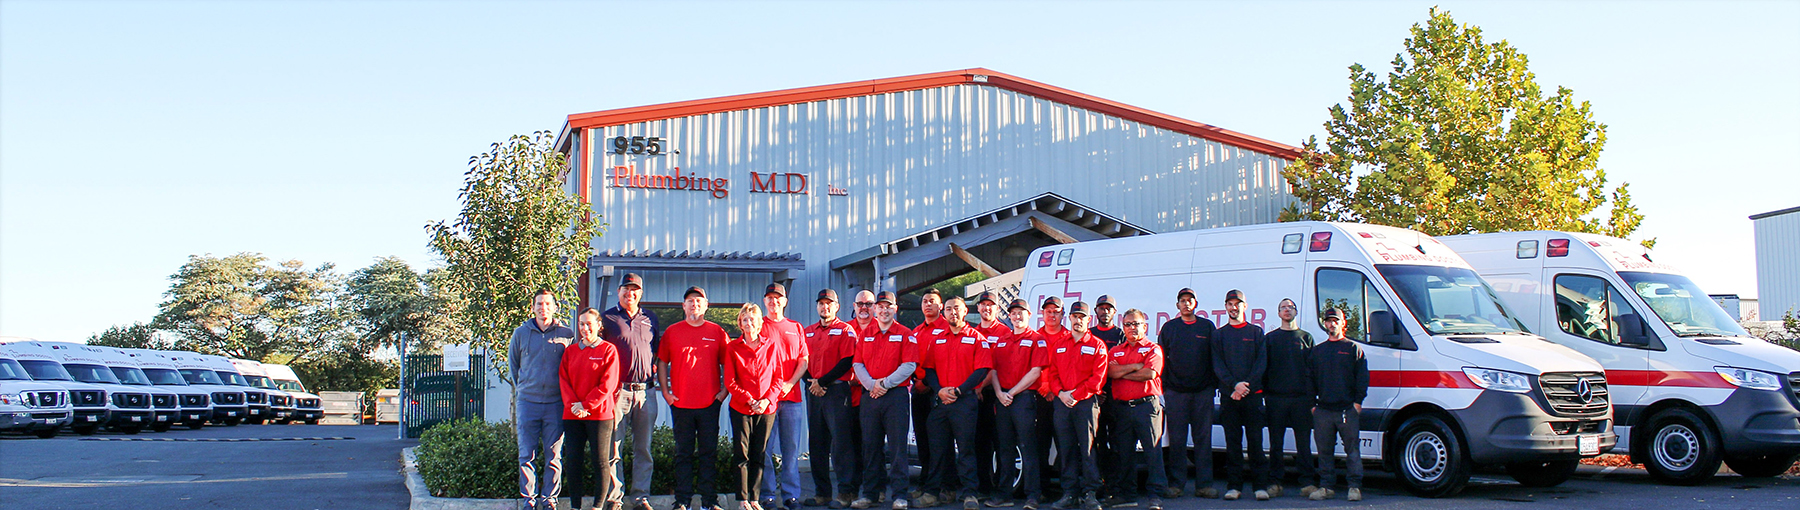 Group photo of Plumbing Doctor team standing next to ambulance style vehicles with the Plumbing Doctor building in the background.